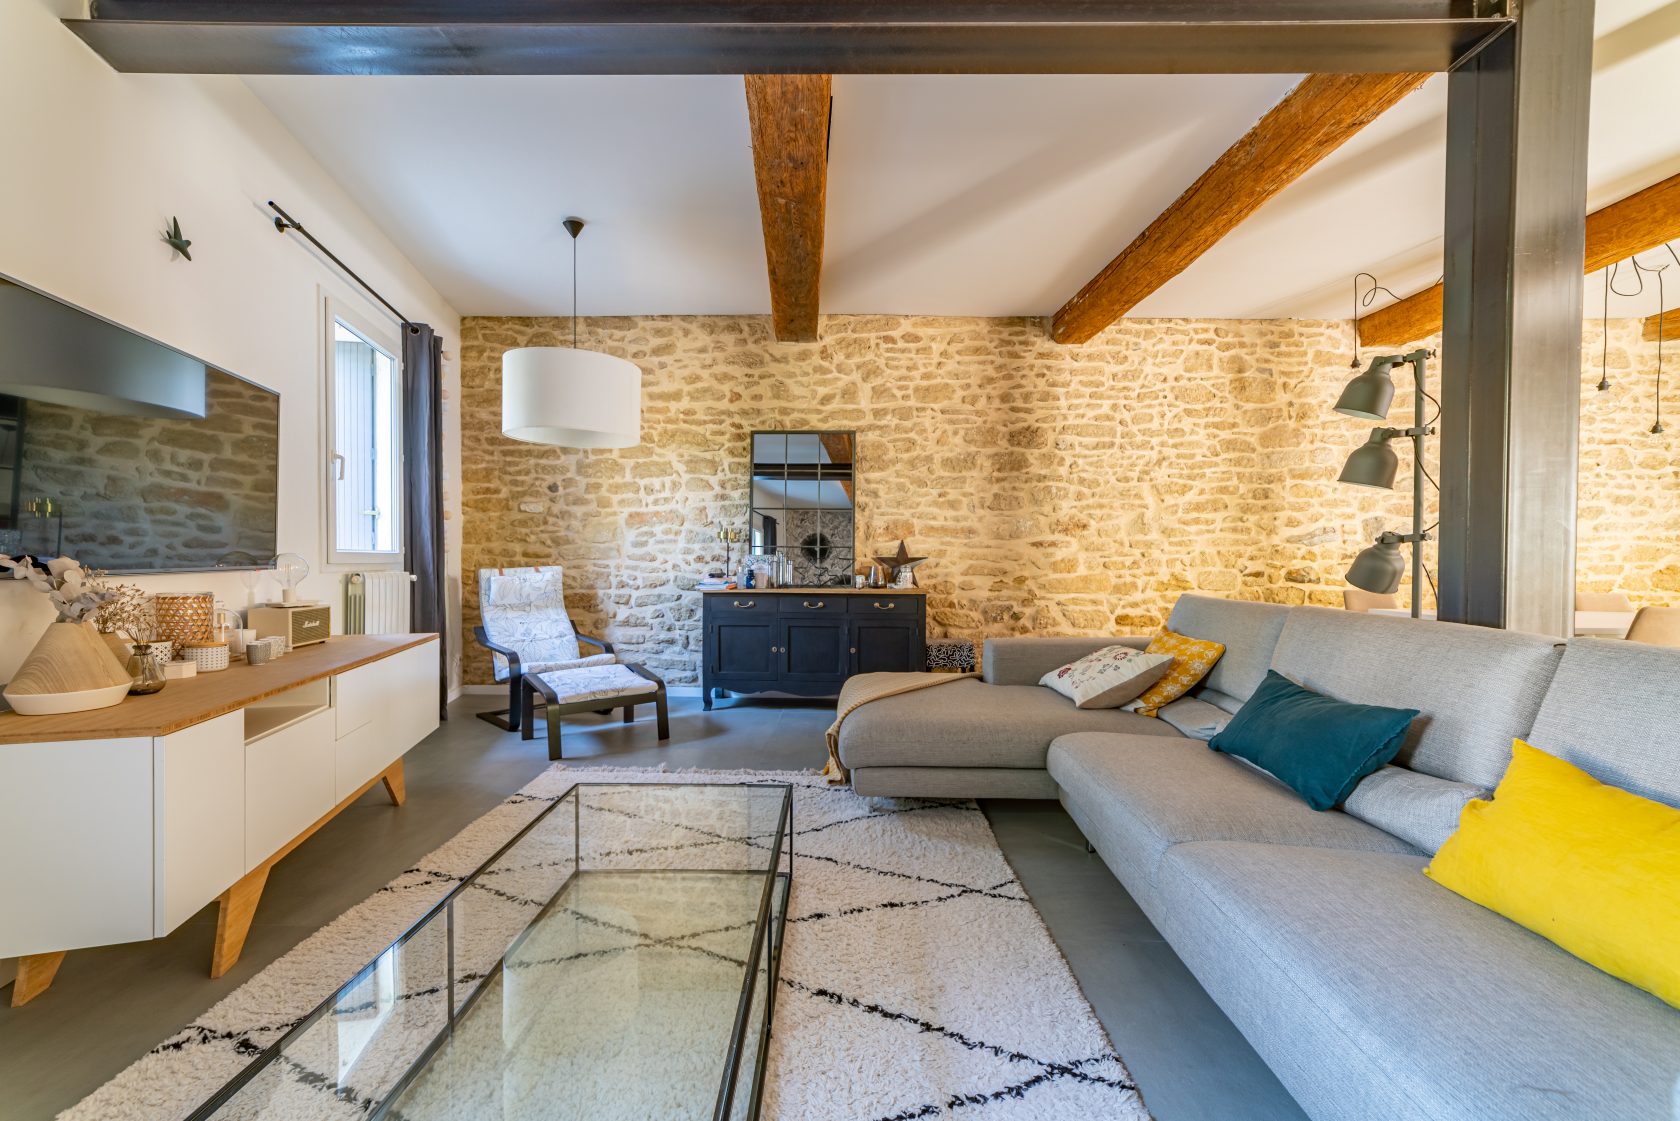 Renovated village house with memories of yesteryear